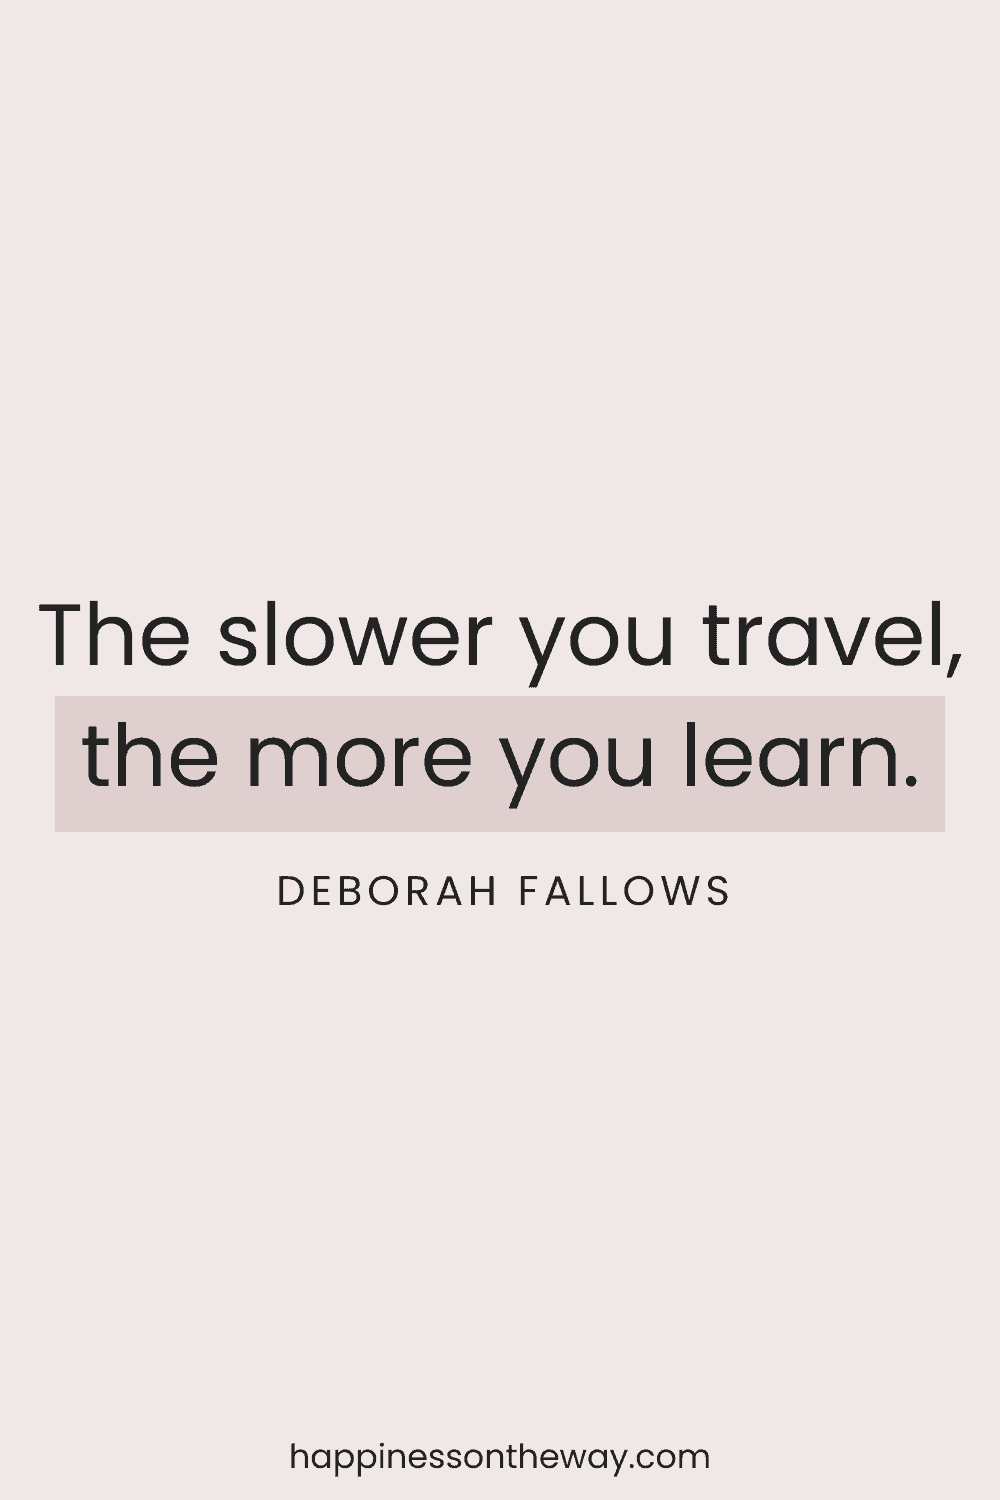 Slow travel quote featuring the saying 'The slower you travel, the more you learn.' by Deborah Fallows on a clean blush background, with the website credit happinessontheway.com at the bottom.